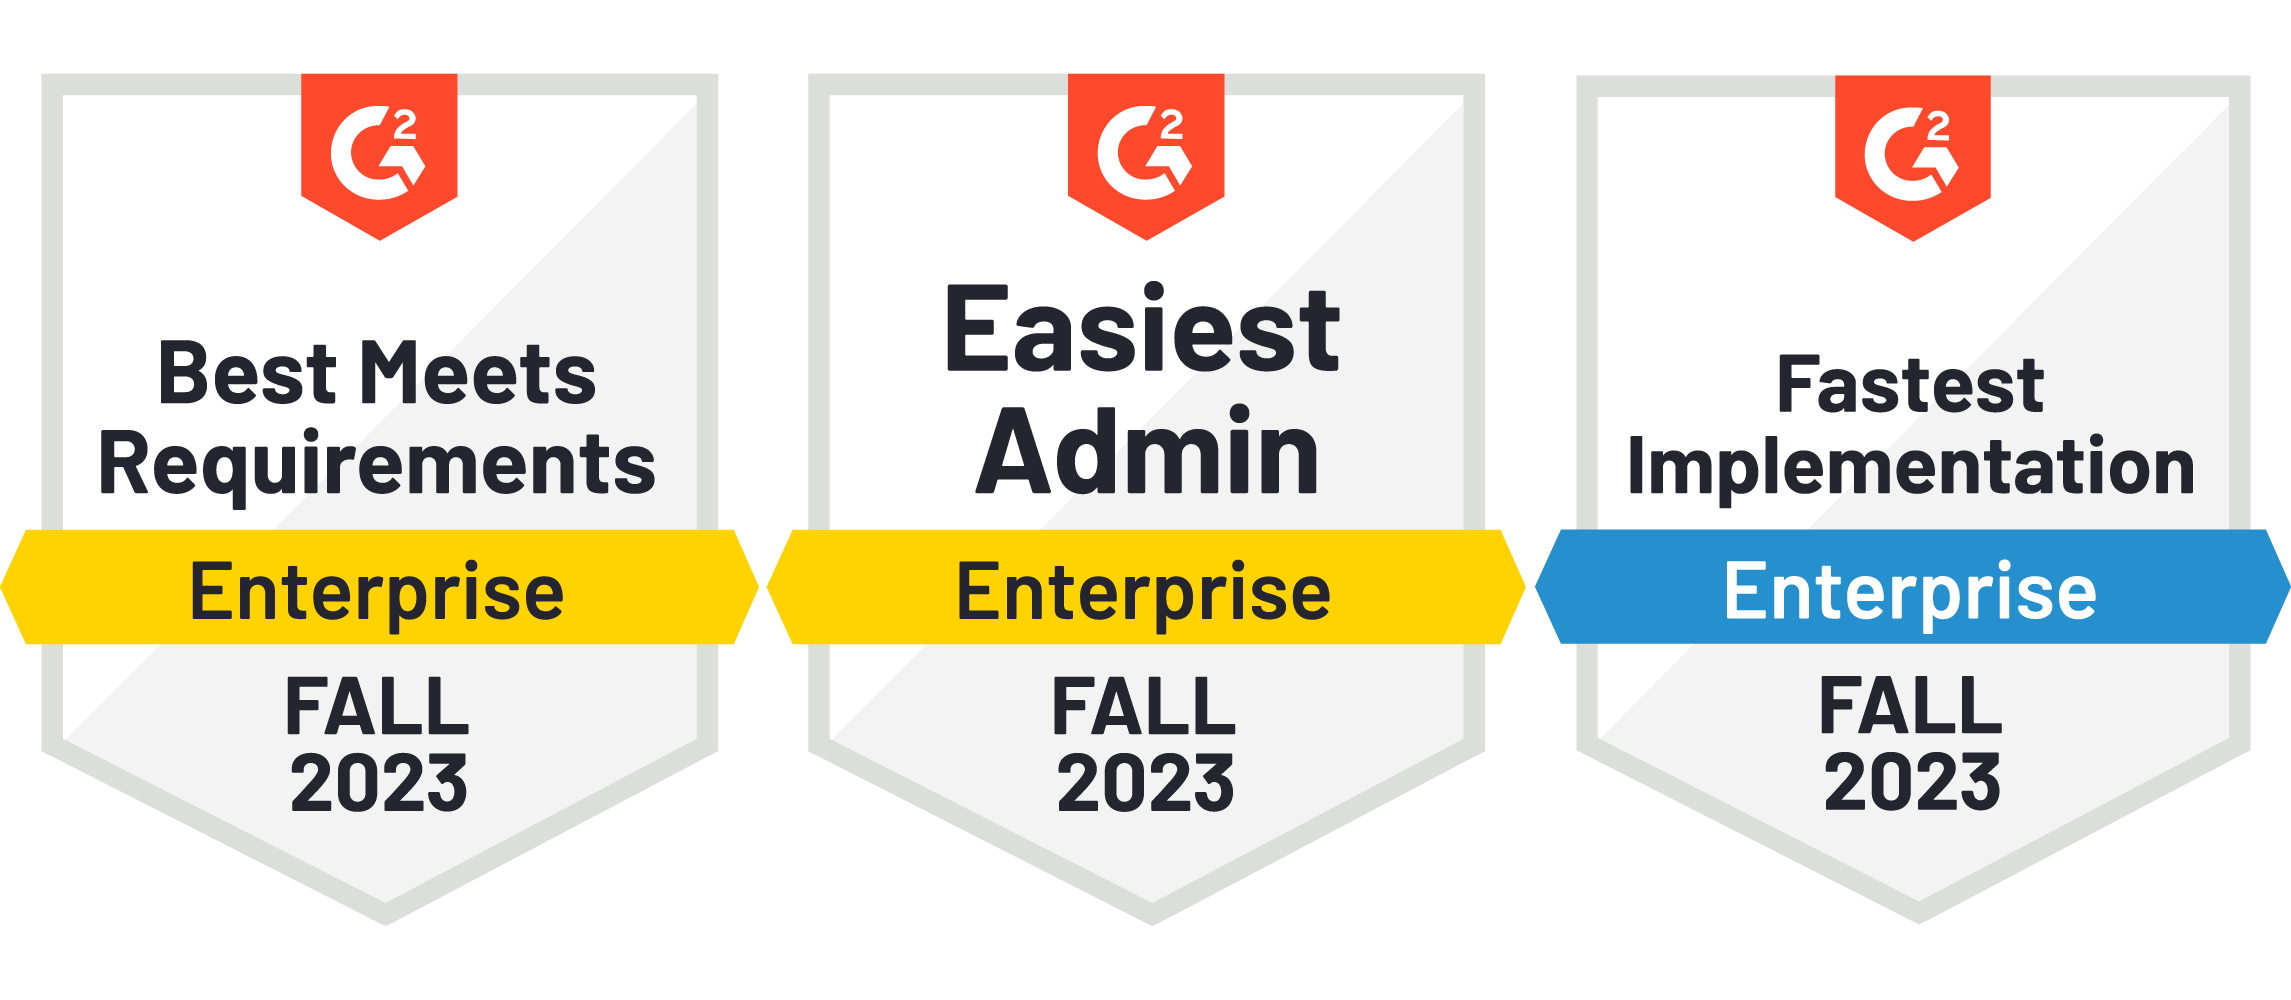 meets-requirments-easitest-admin-fastest-implementation-fall-g2-2023